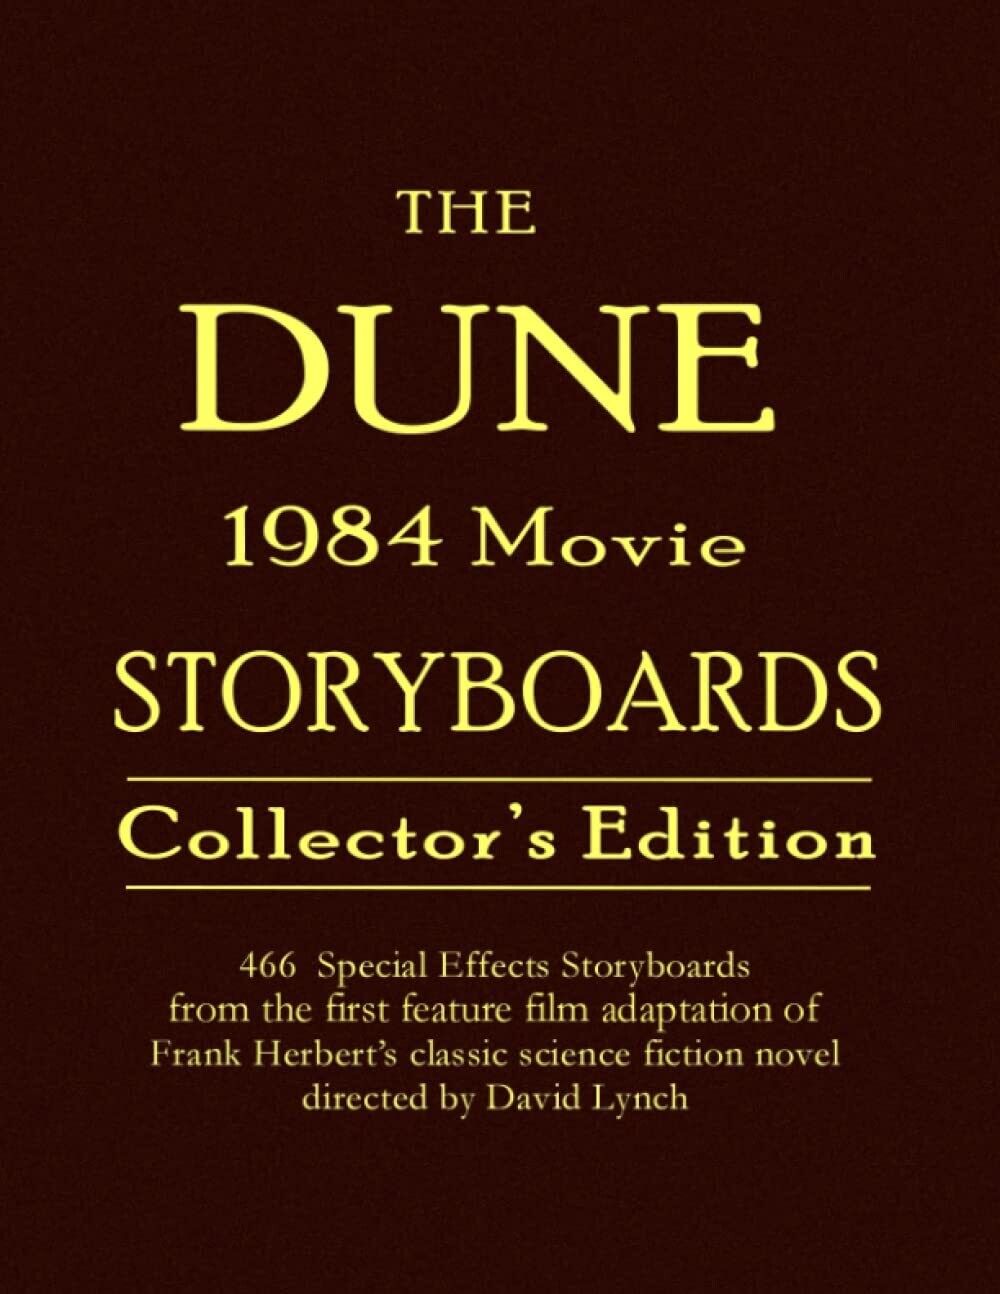 The DUNE 1984 Movie Storyboards Collector's Edition (Paperback, NEW)